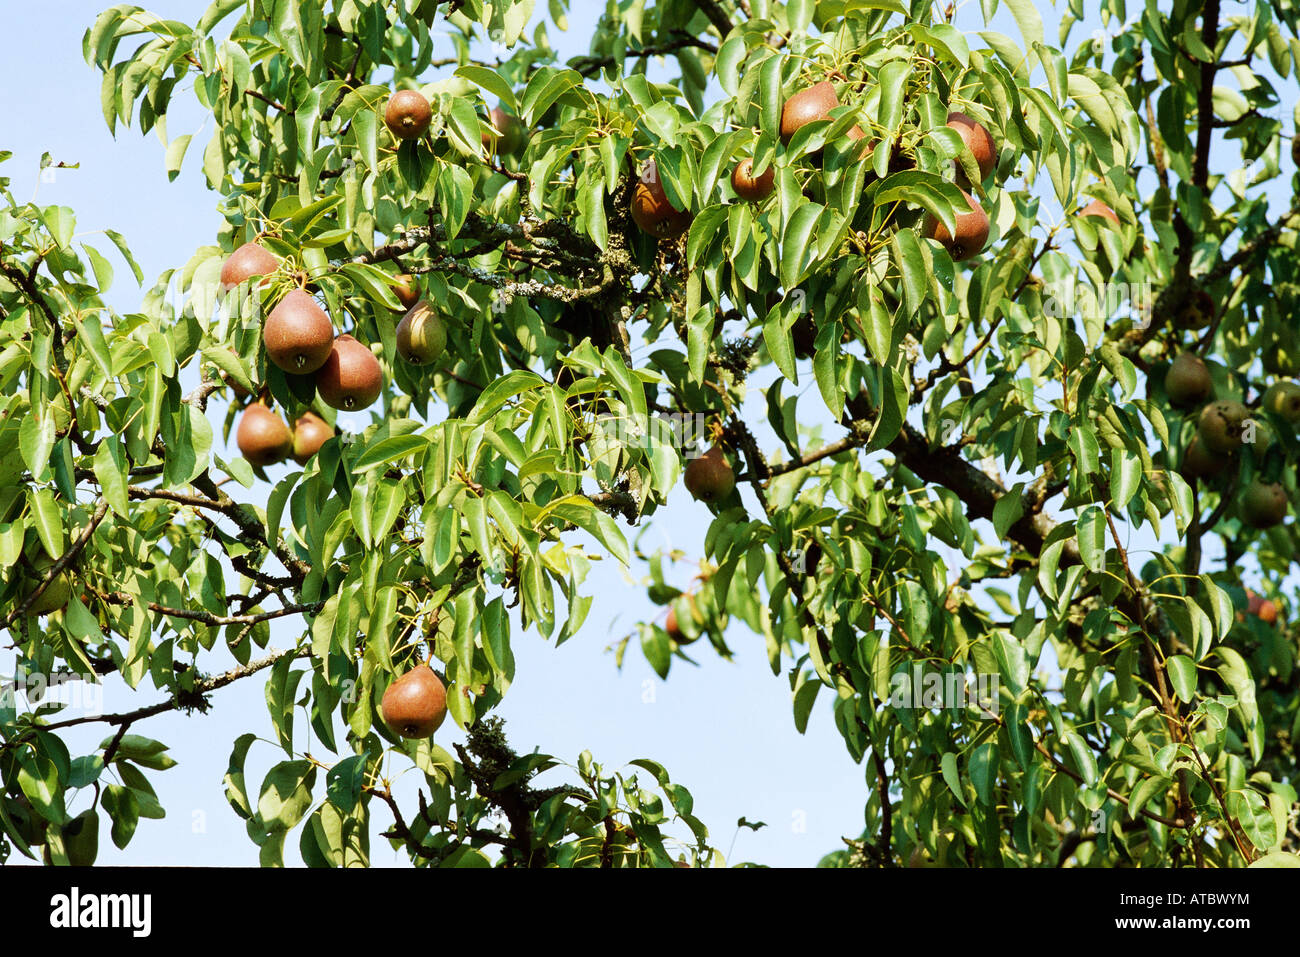 Pears growing on tree branch, close-up Stock Photo